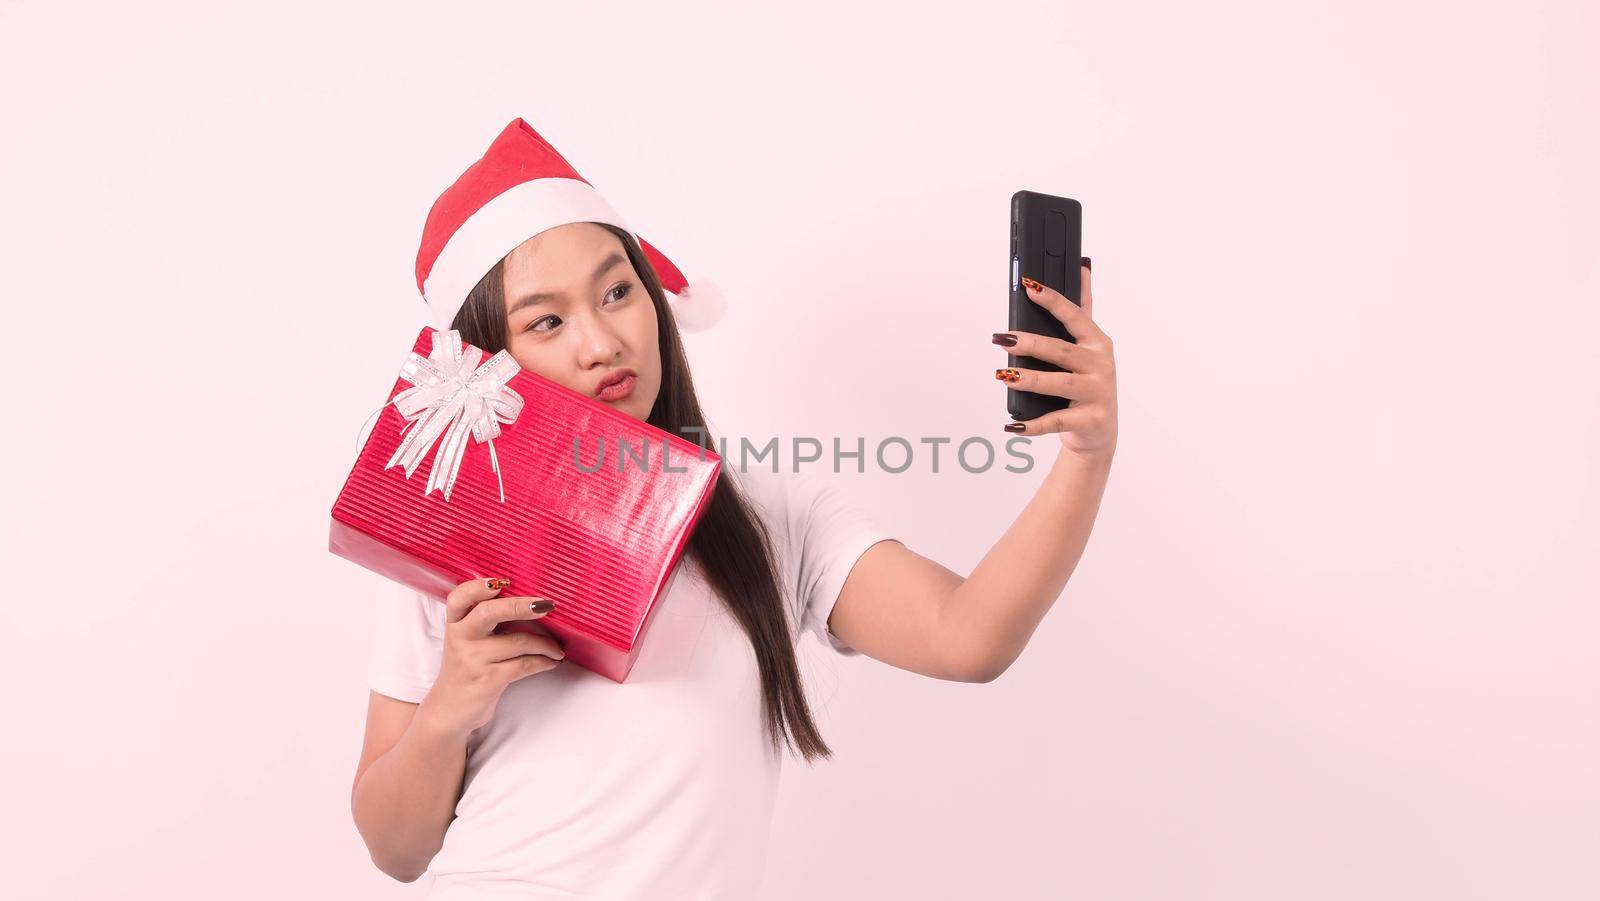 Girl hold gift box make selfie or video online with x-mas christmas prop decoration. Asian Thai teen woman taking online-selfie to celebrate festive season with her friend by red giftbox. studio shot.